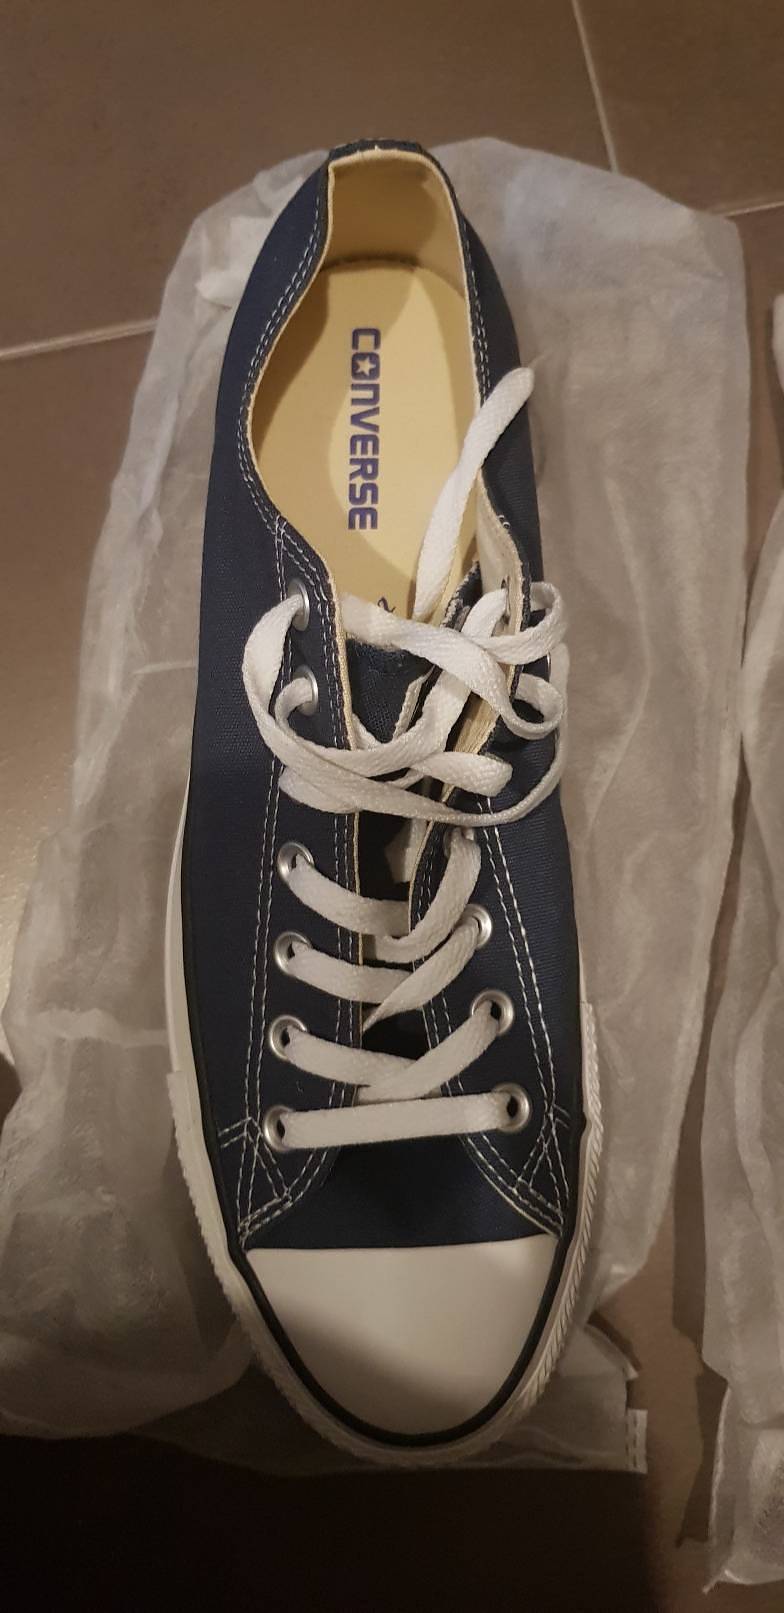 Converse All Star Sneaker - Size UK 11 0